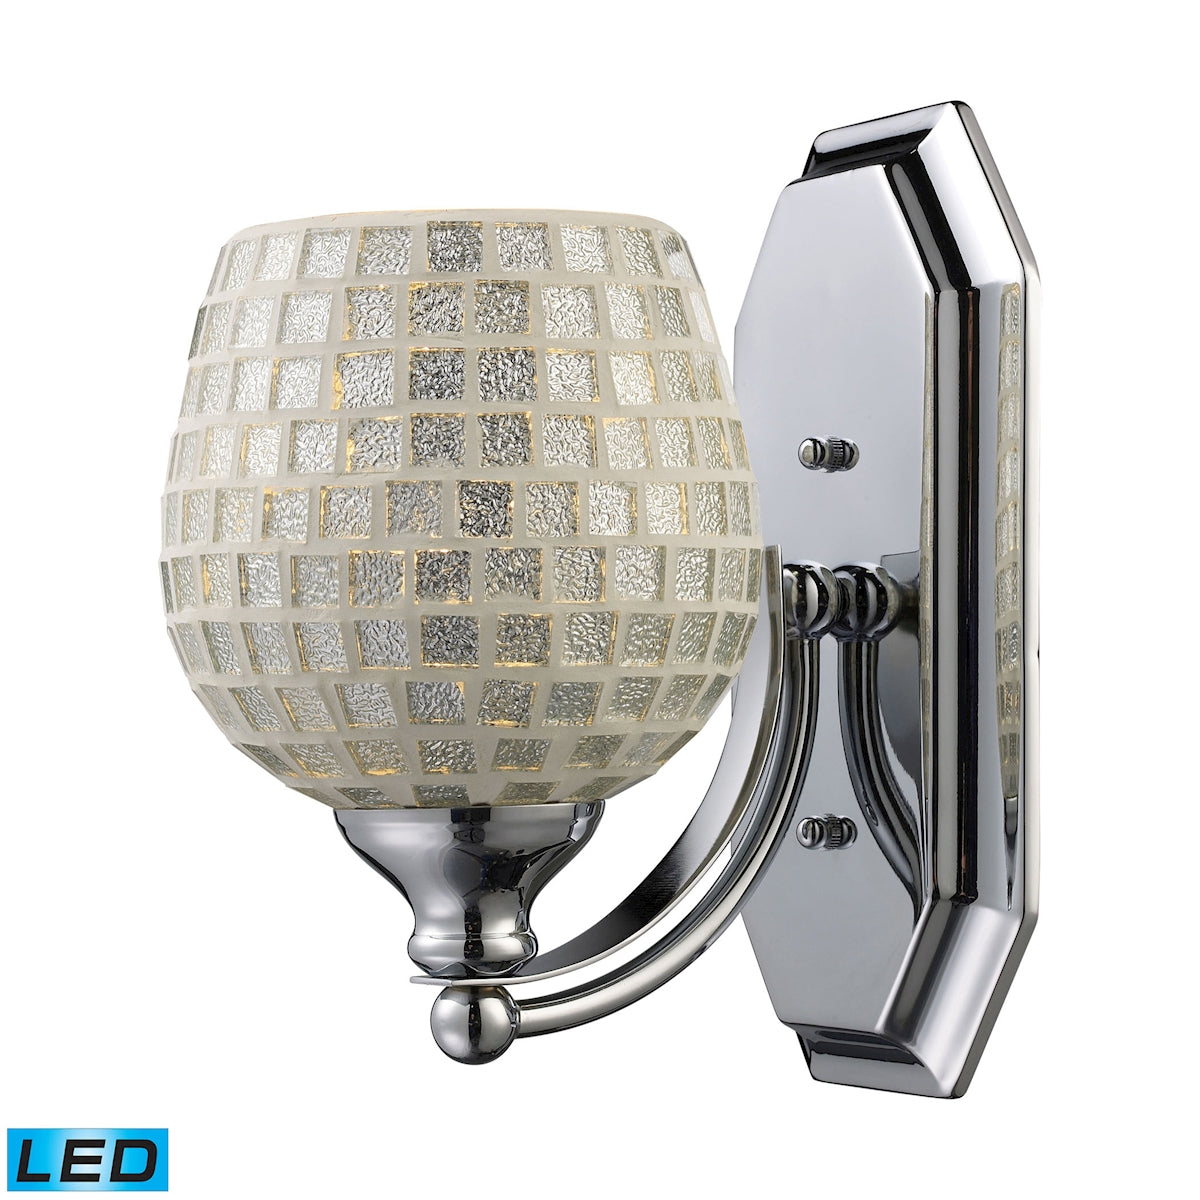 Mix and Match Vanity 1-Light Wall Lamp in Chrome with Silver Glass - Includes LED Bulb